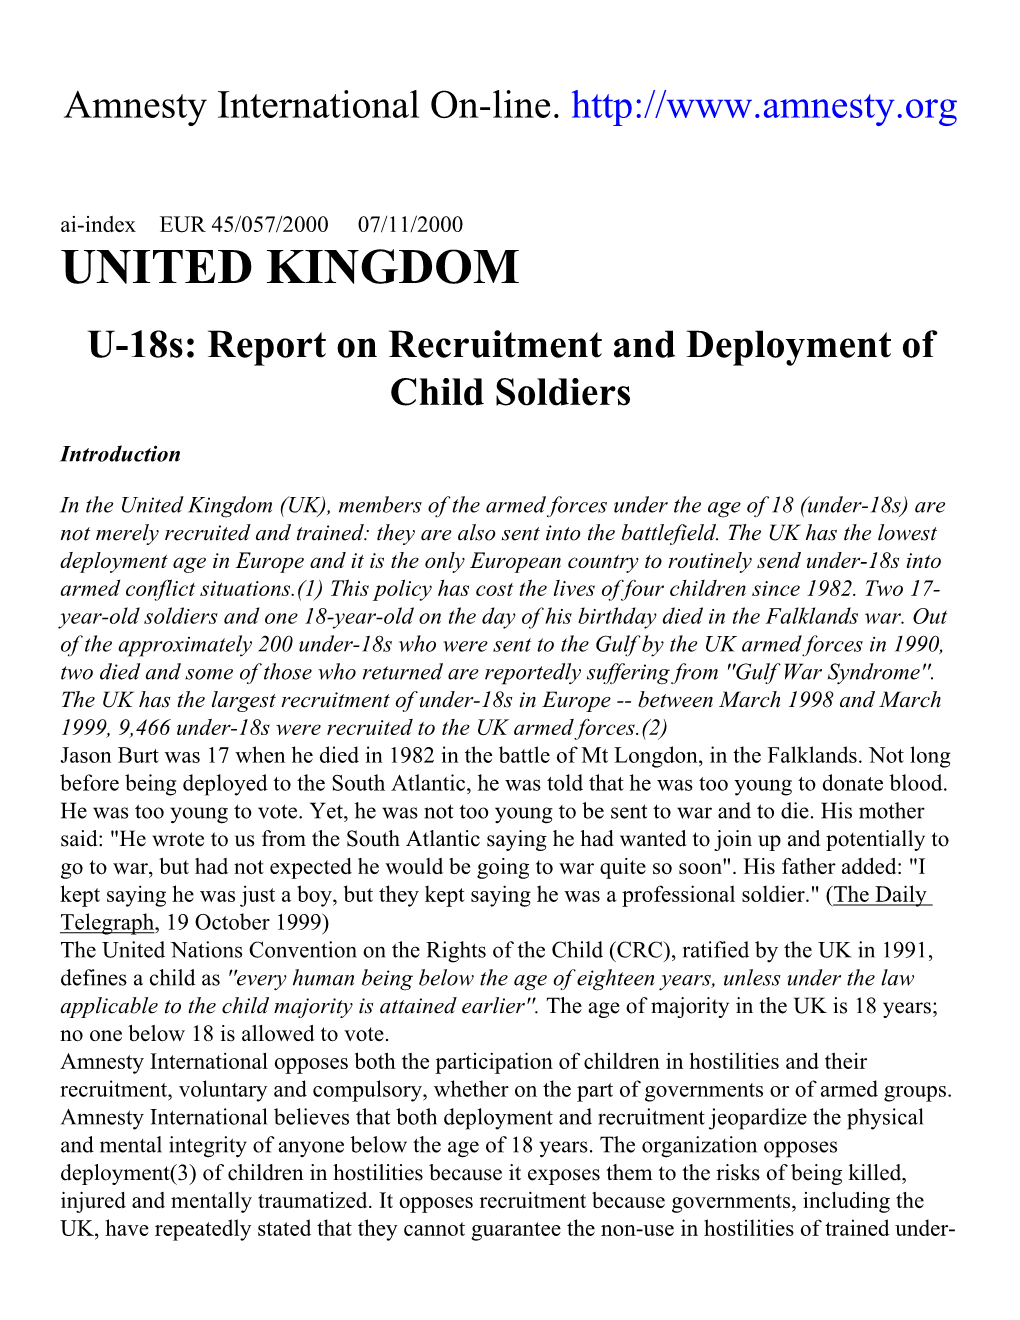 UNITED KINGDOM U-18S: Report on Recruitment and Deployment of Child Soldiers